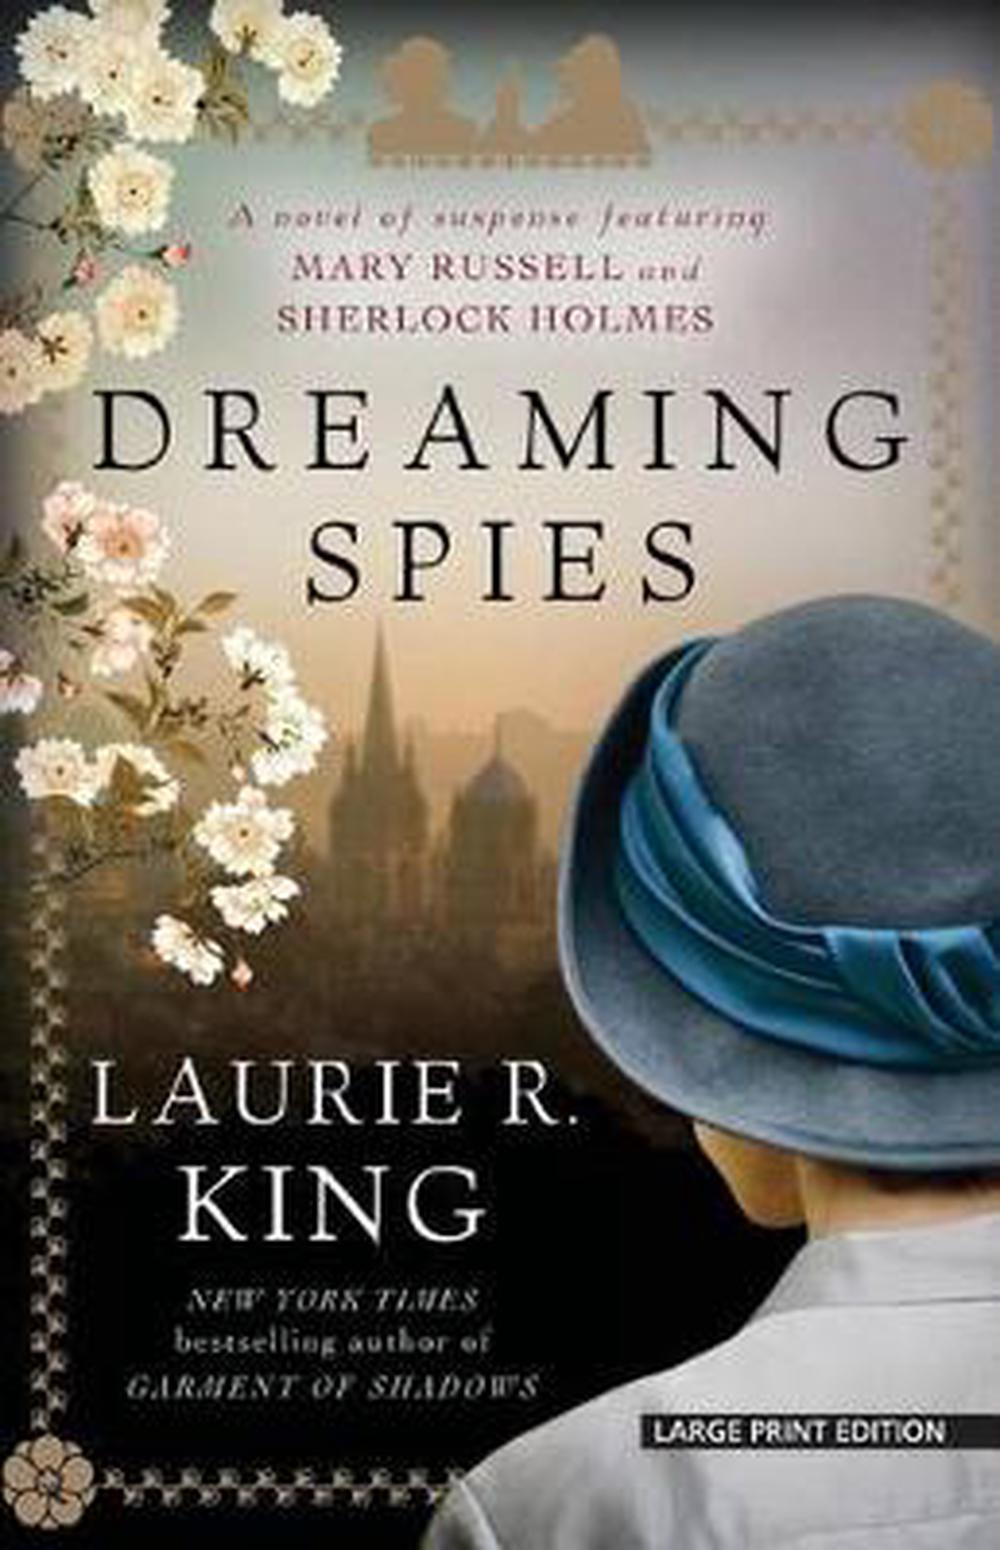 dreaming spies by laurie r king